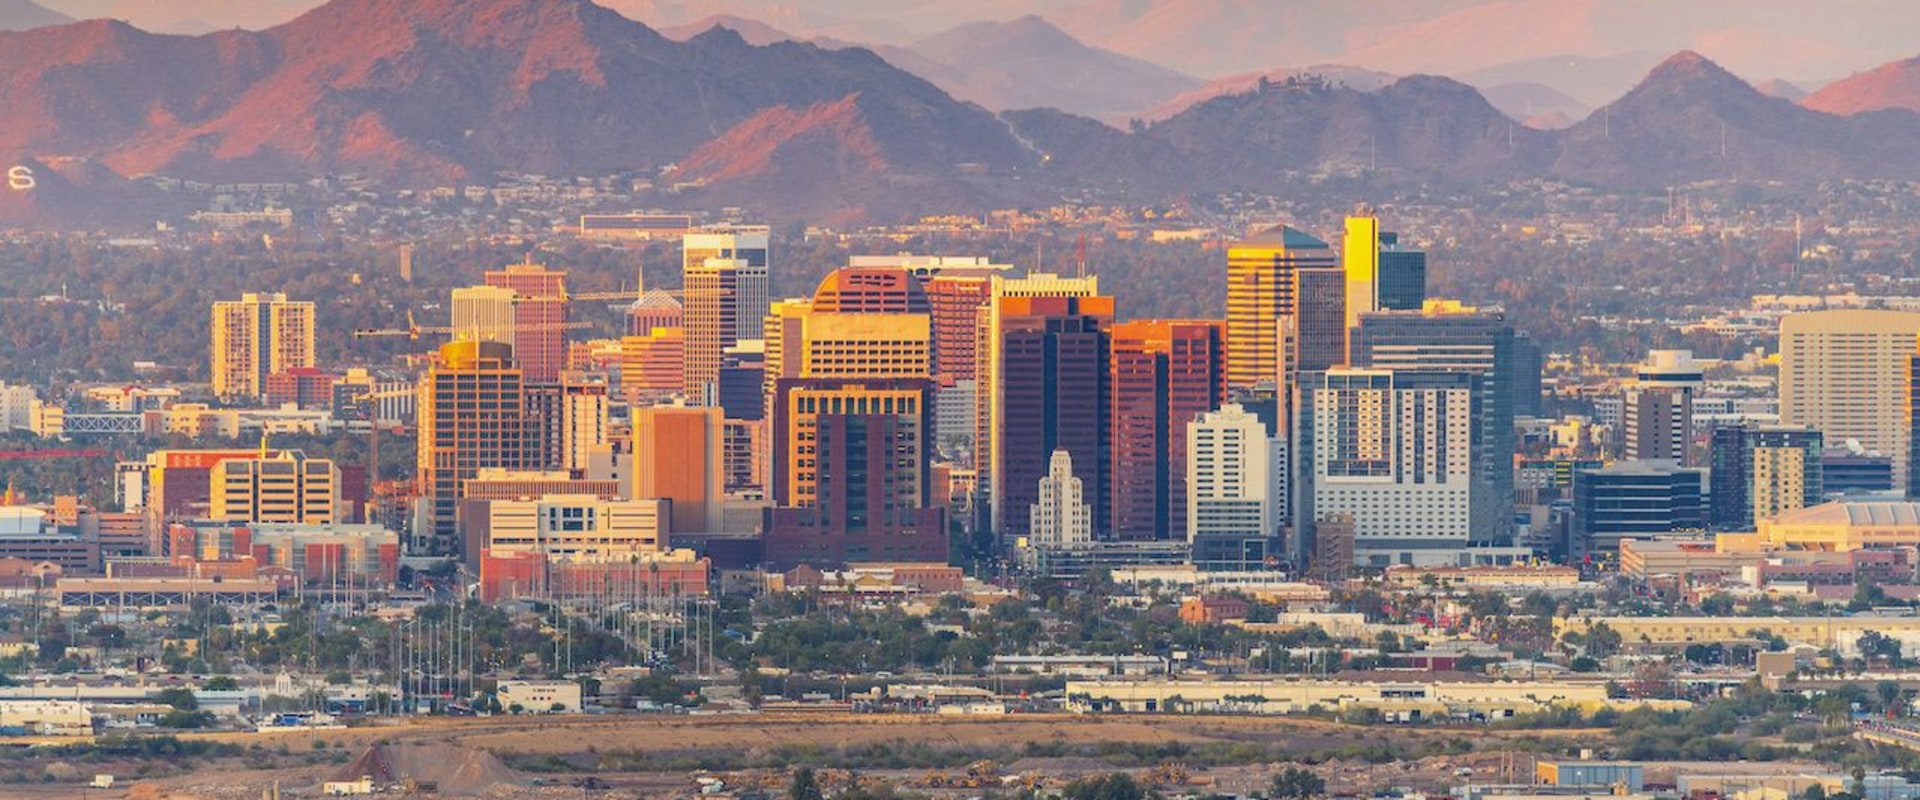 Is phoenix or scottsdale better to visit?